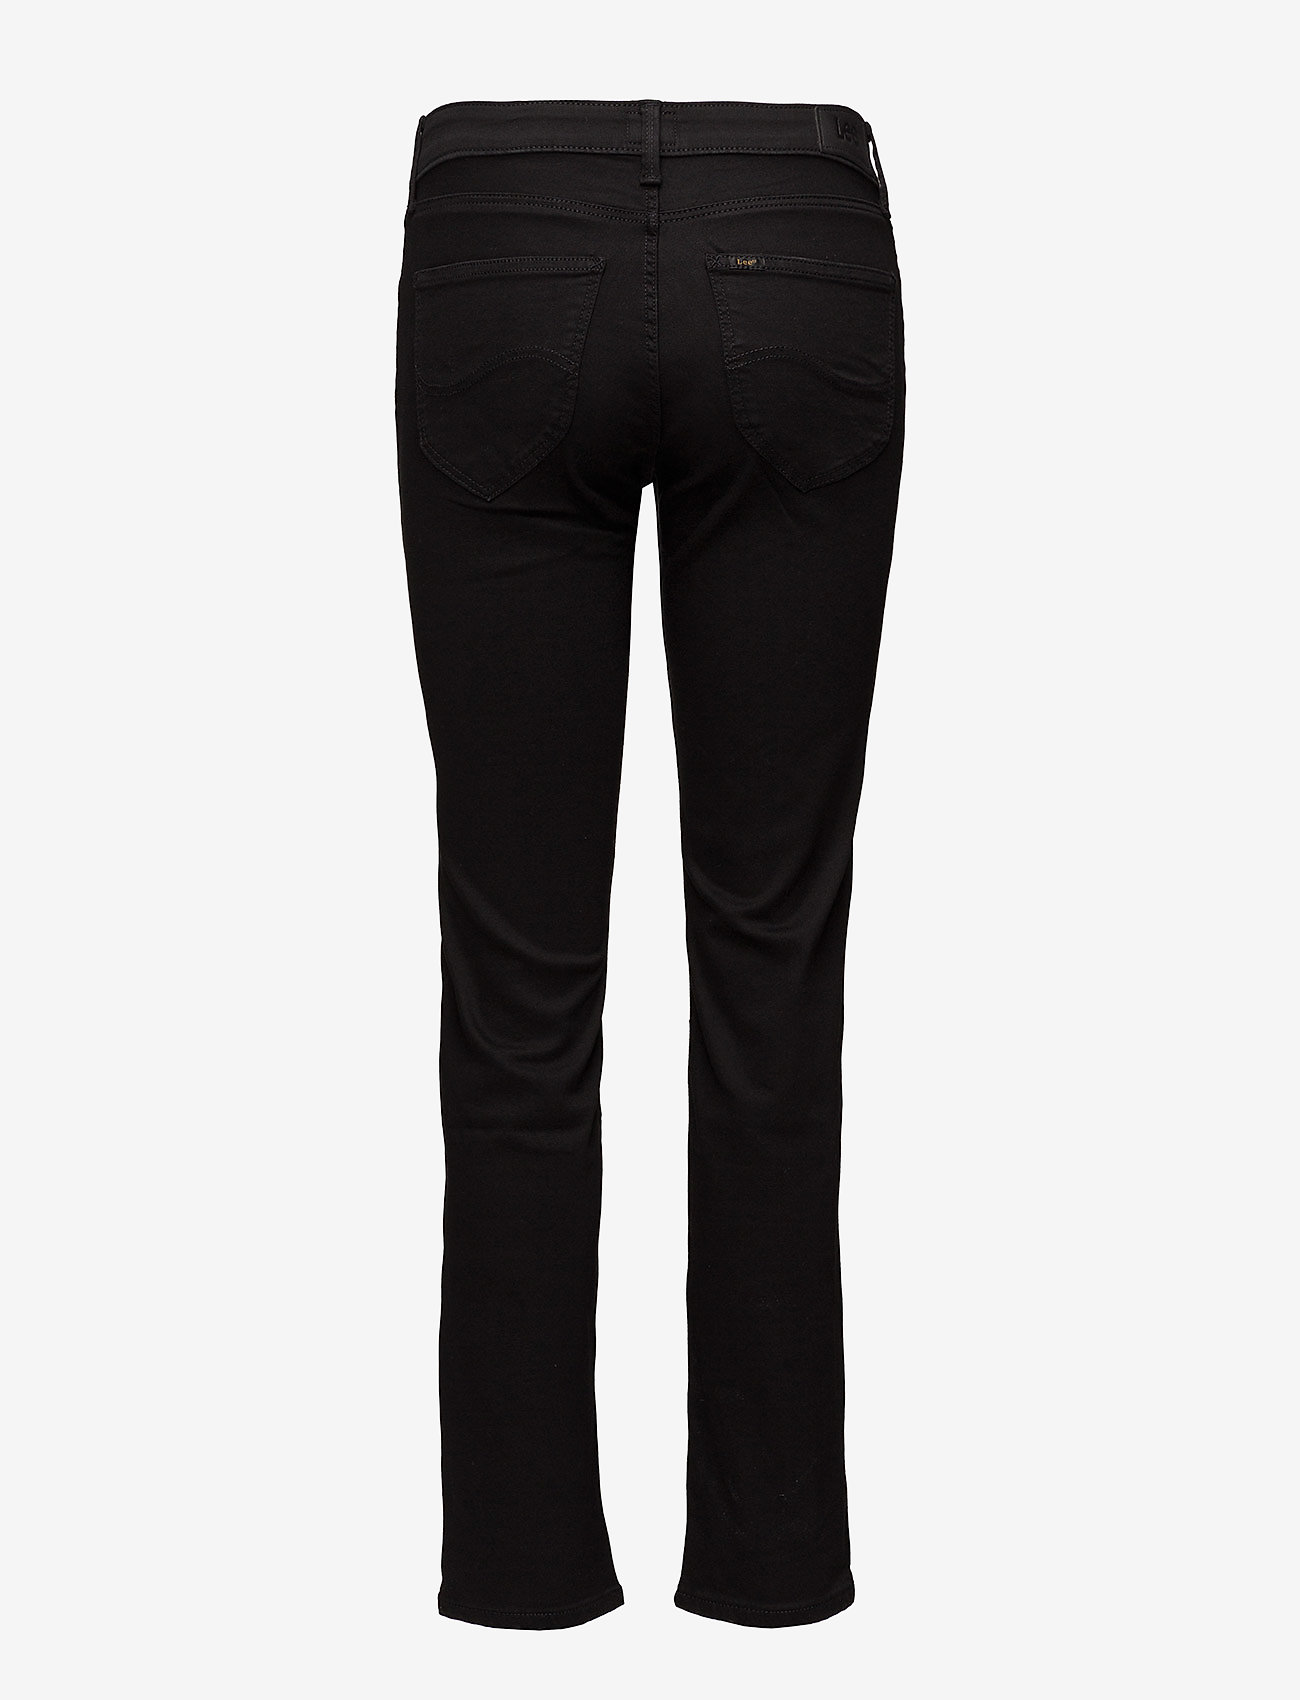 Lee Jeans - Marion Straight - proste dżinsy - black rinse - 1